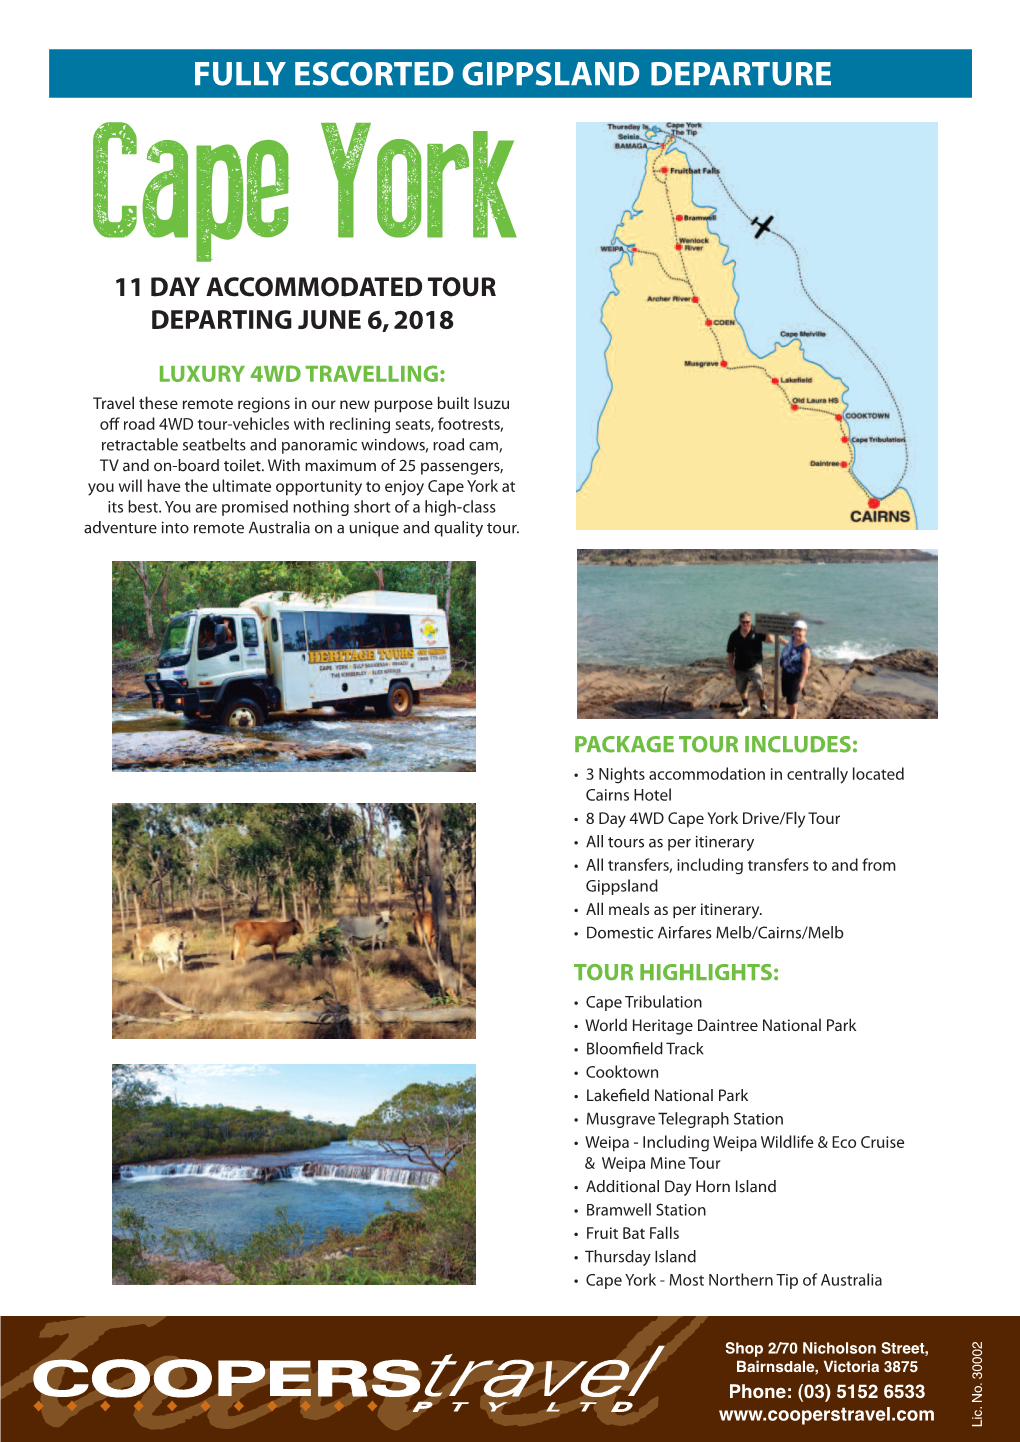 FULLY ESCORTED GIPPSLAND DEPARTURE Cape York 11 DAY ACCOMMODATED TOUR DEPARTING JUNE 6, 2018